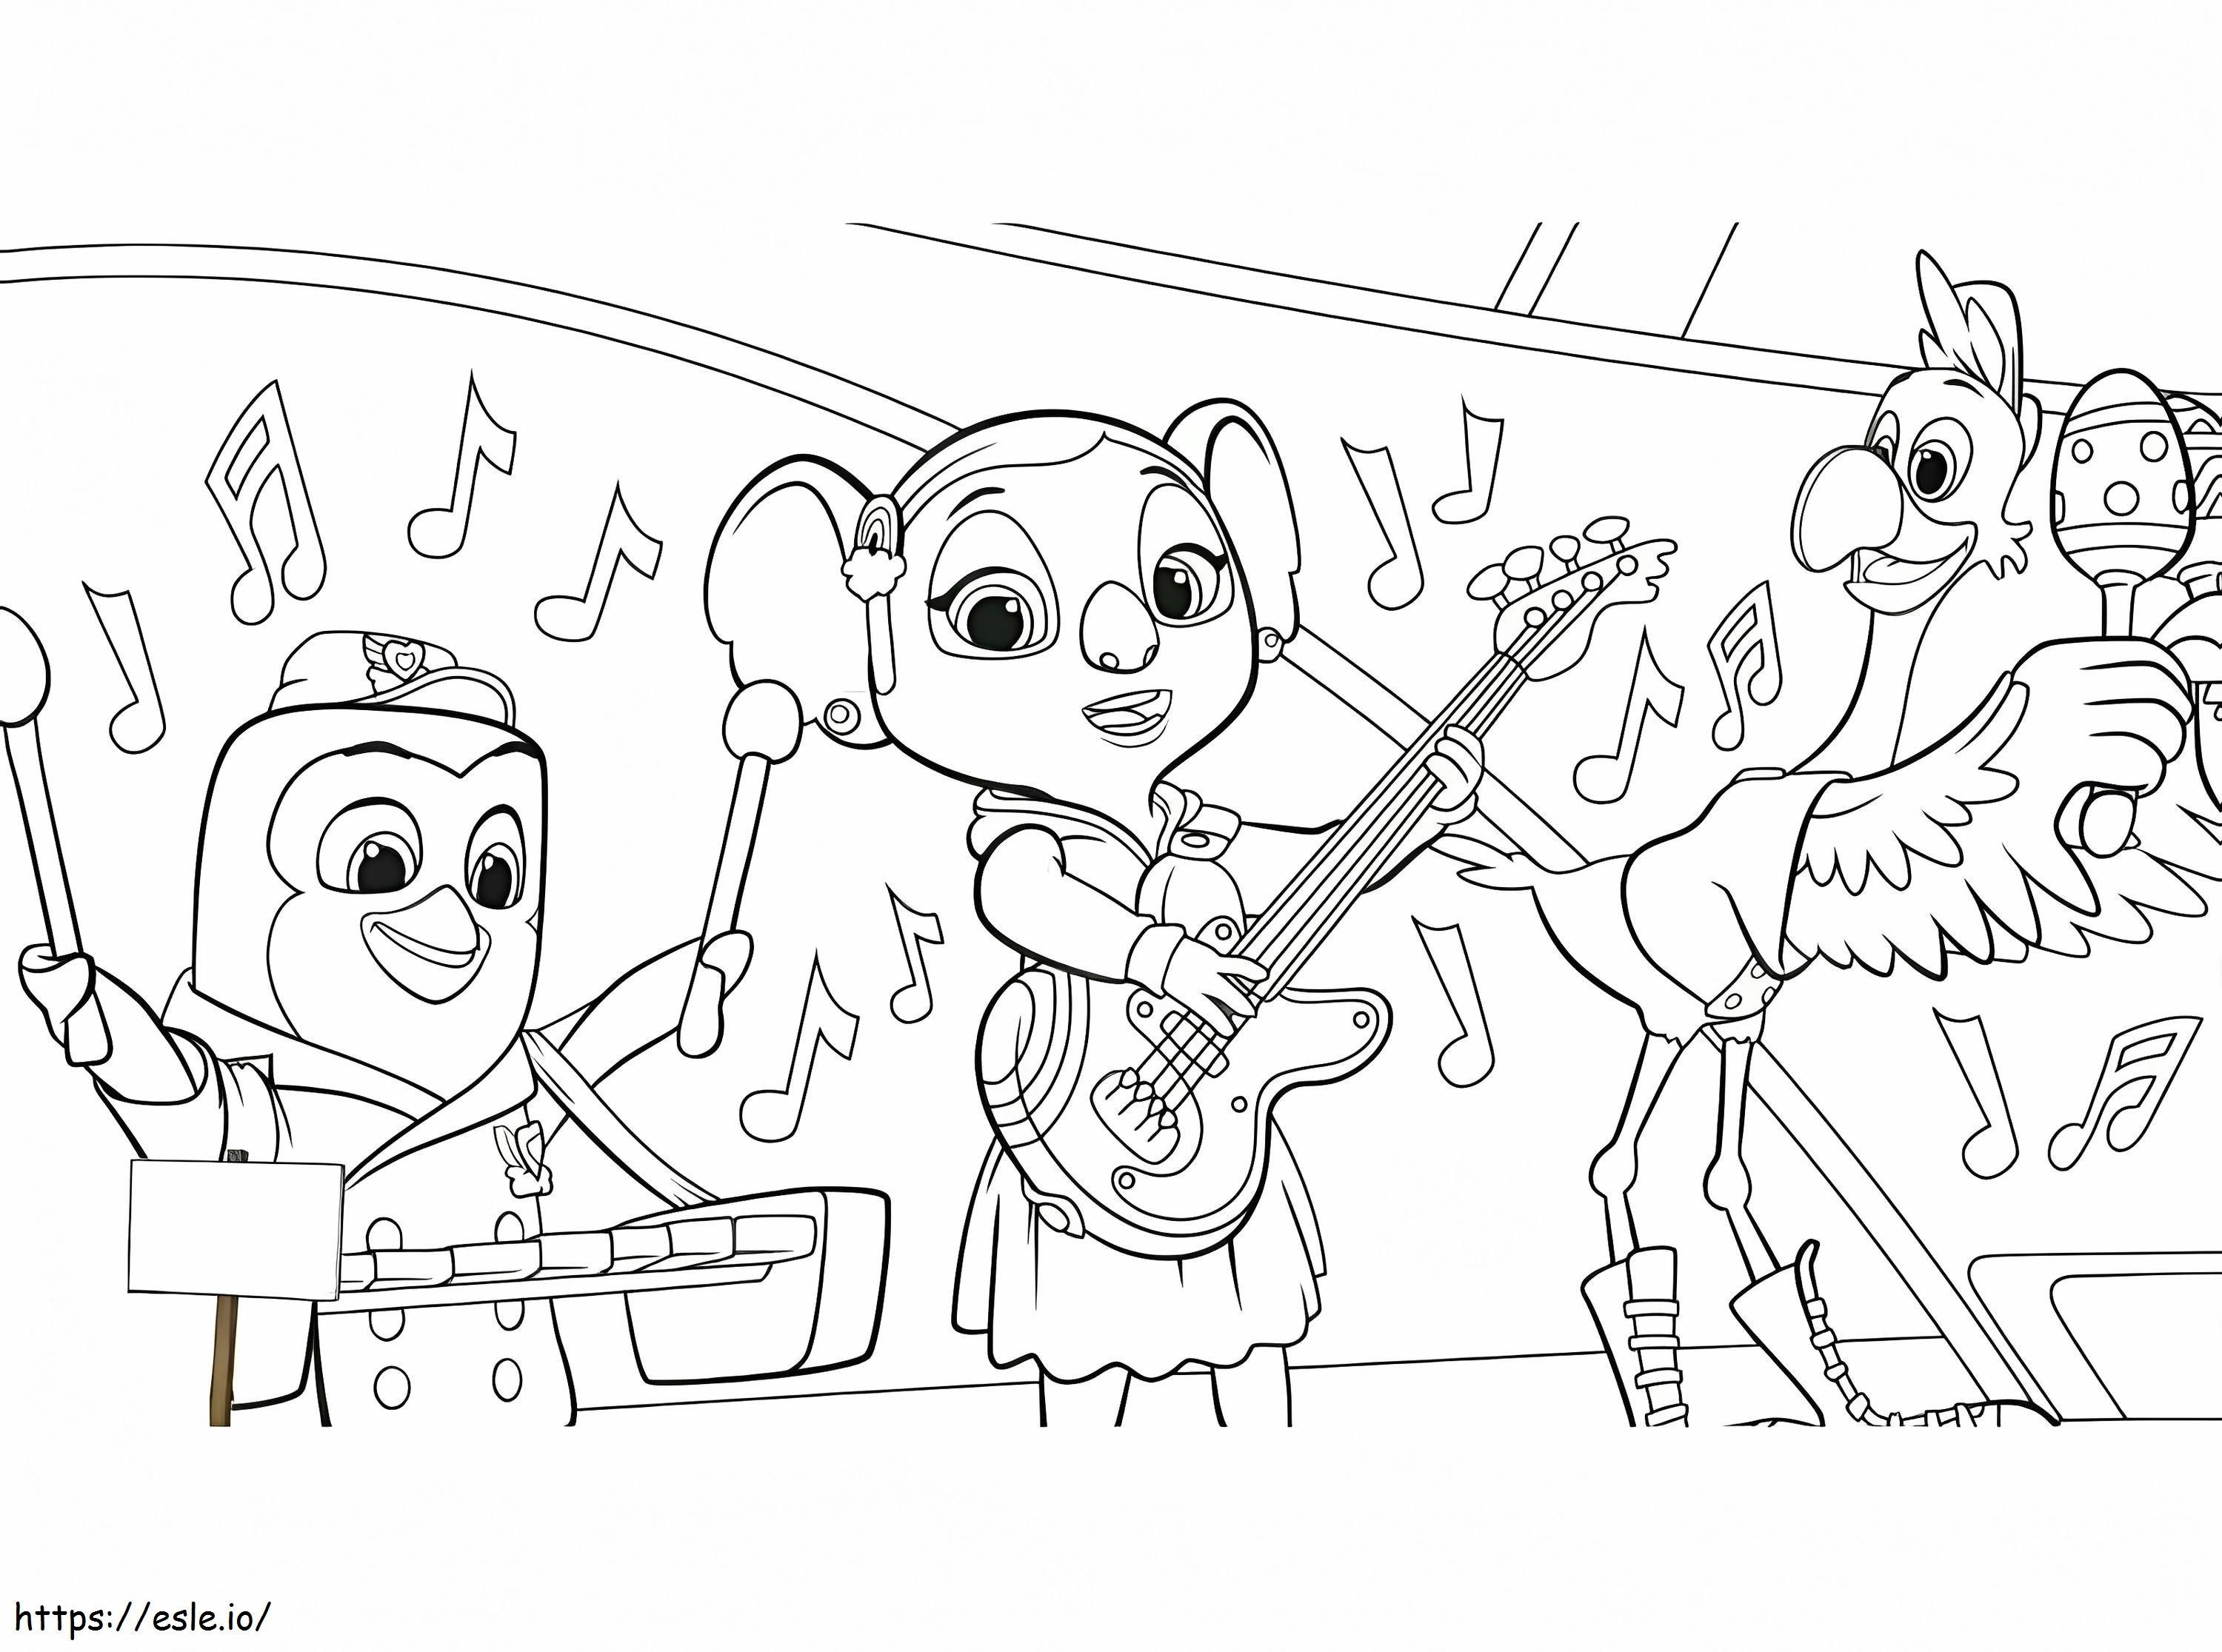 T.O.T.S Characters 1 coloring page